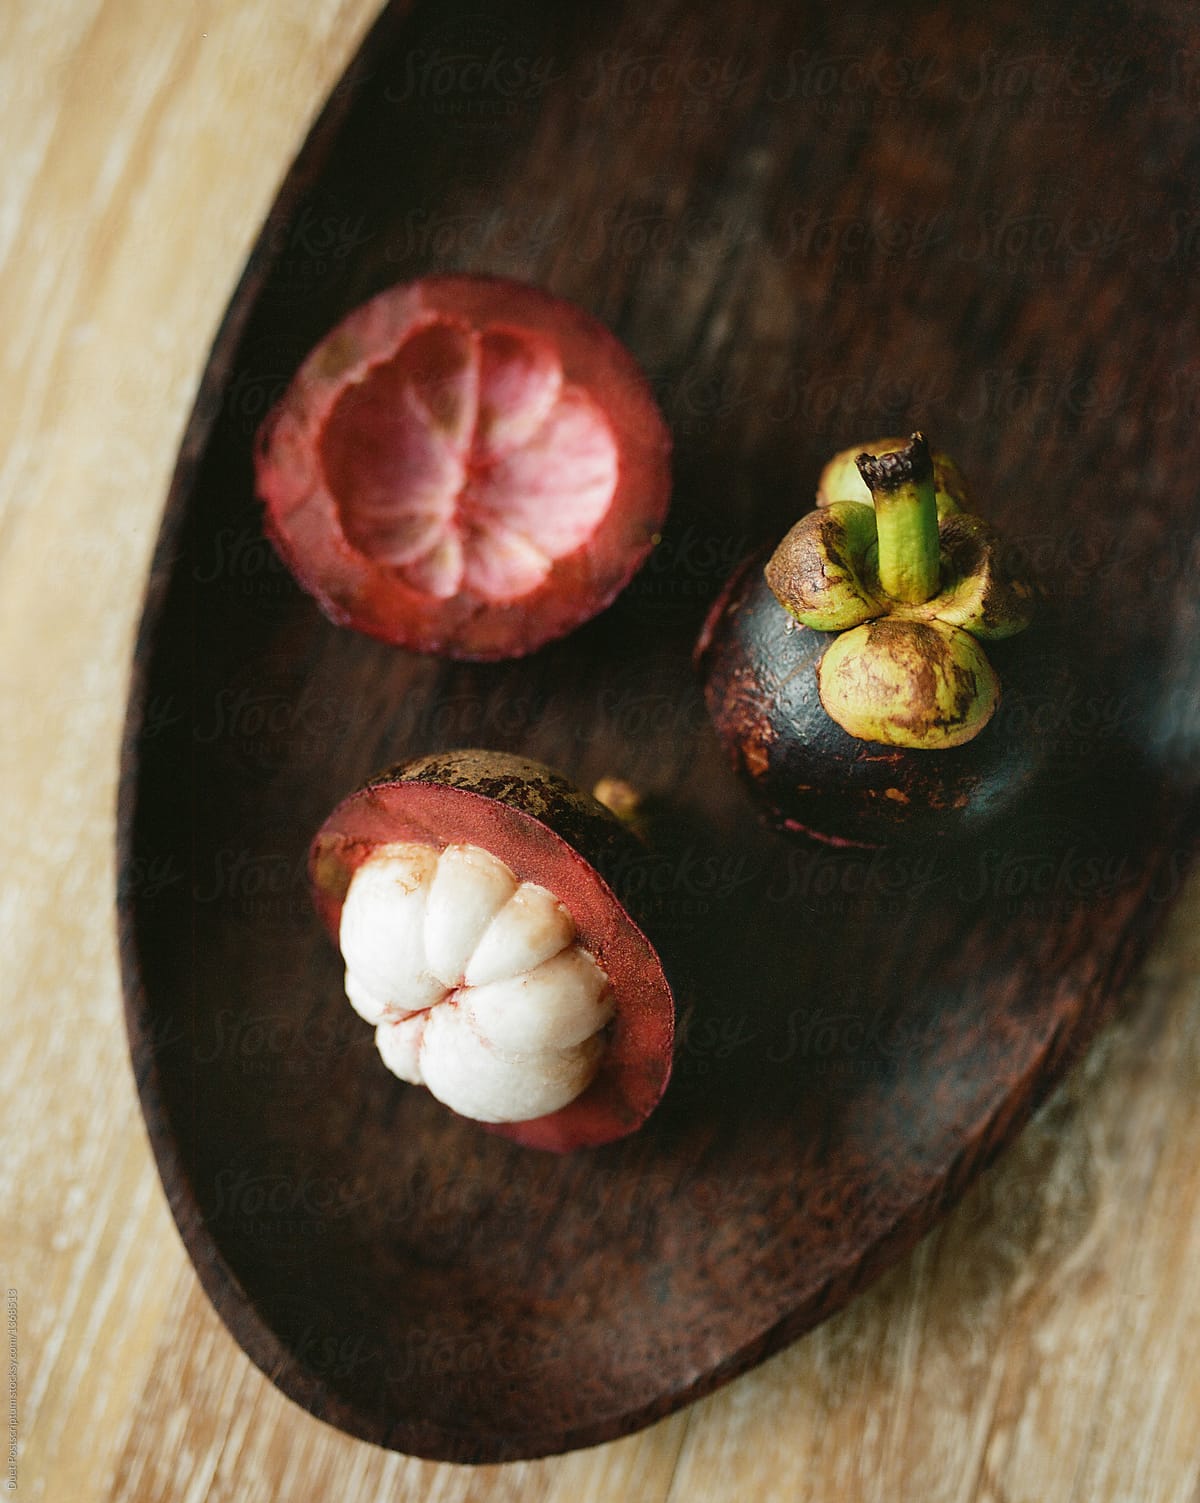 The cut mangosteen lies on a tray